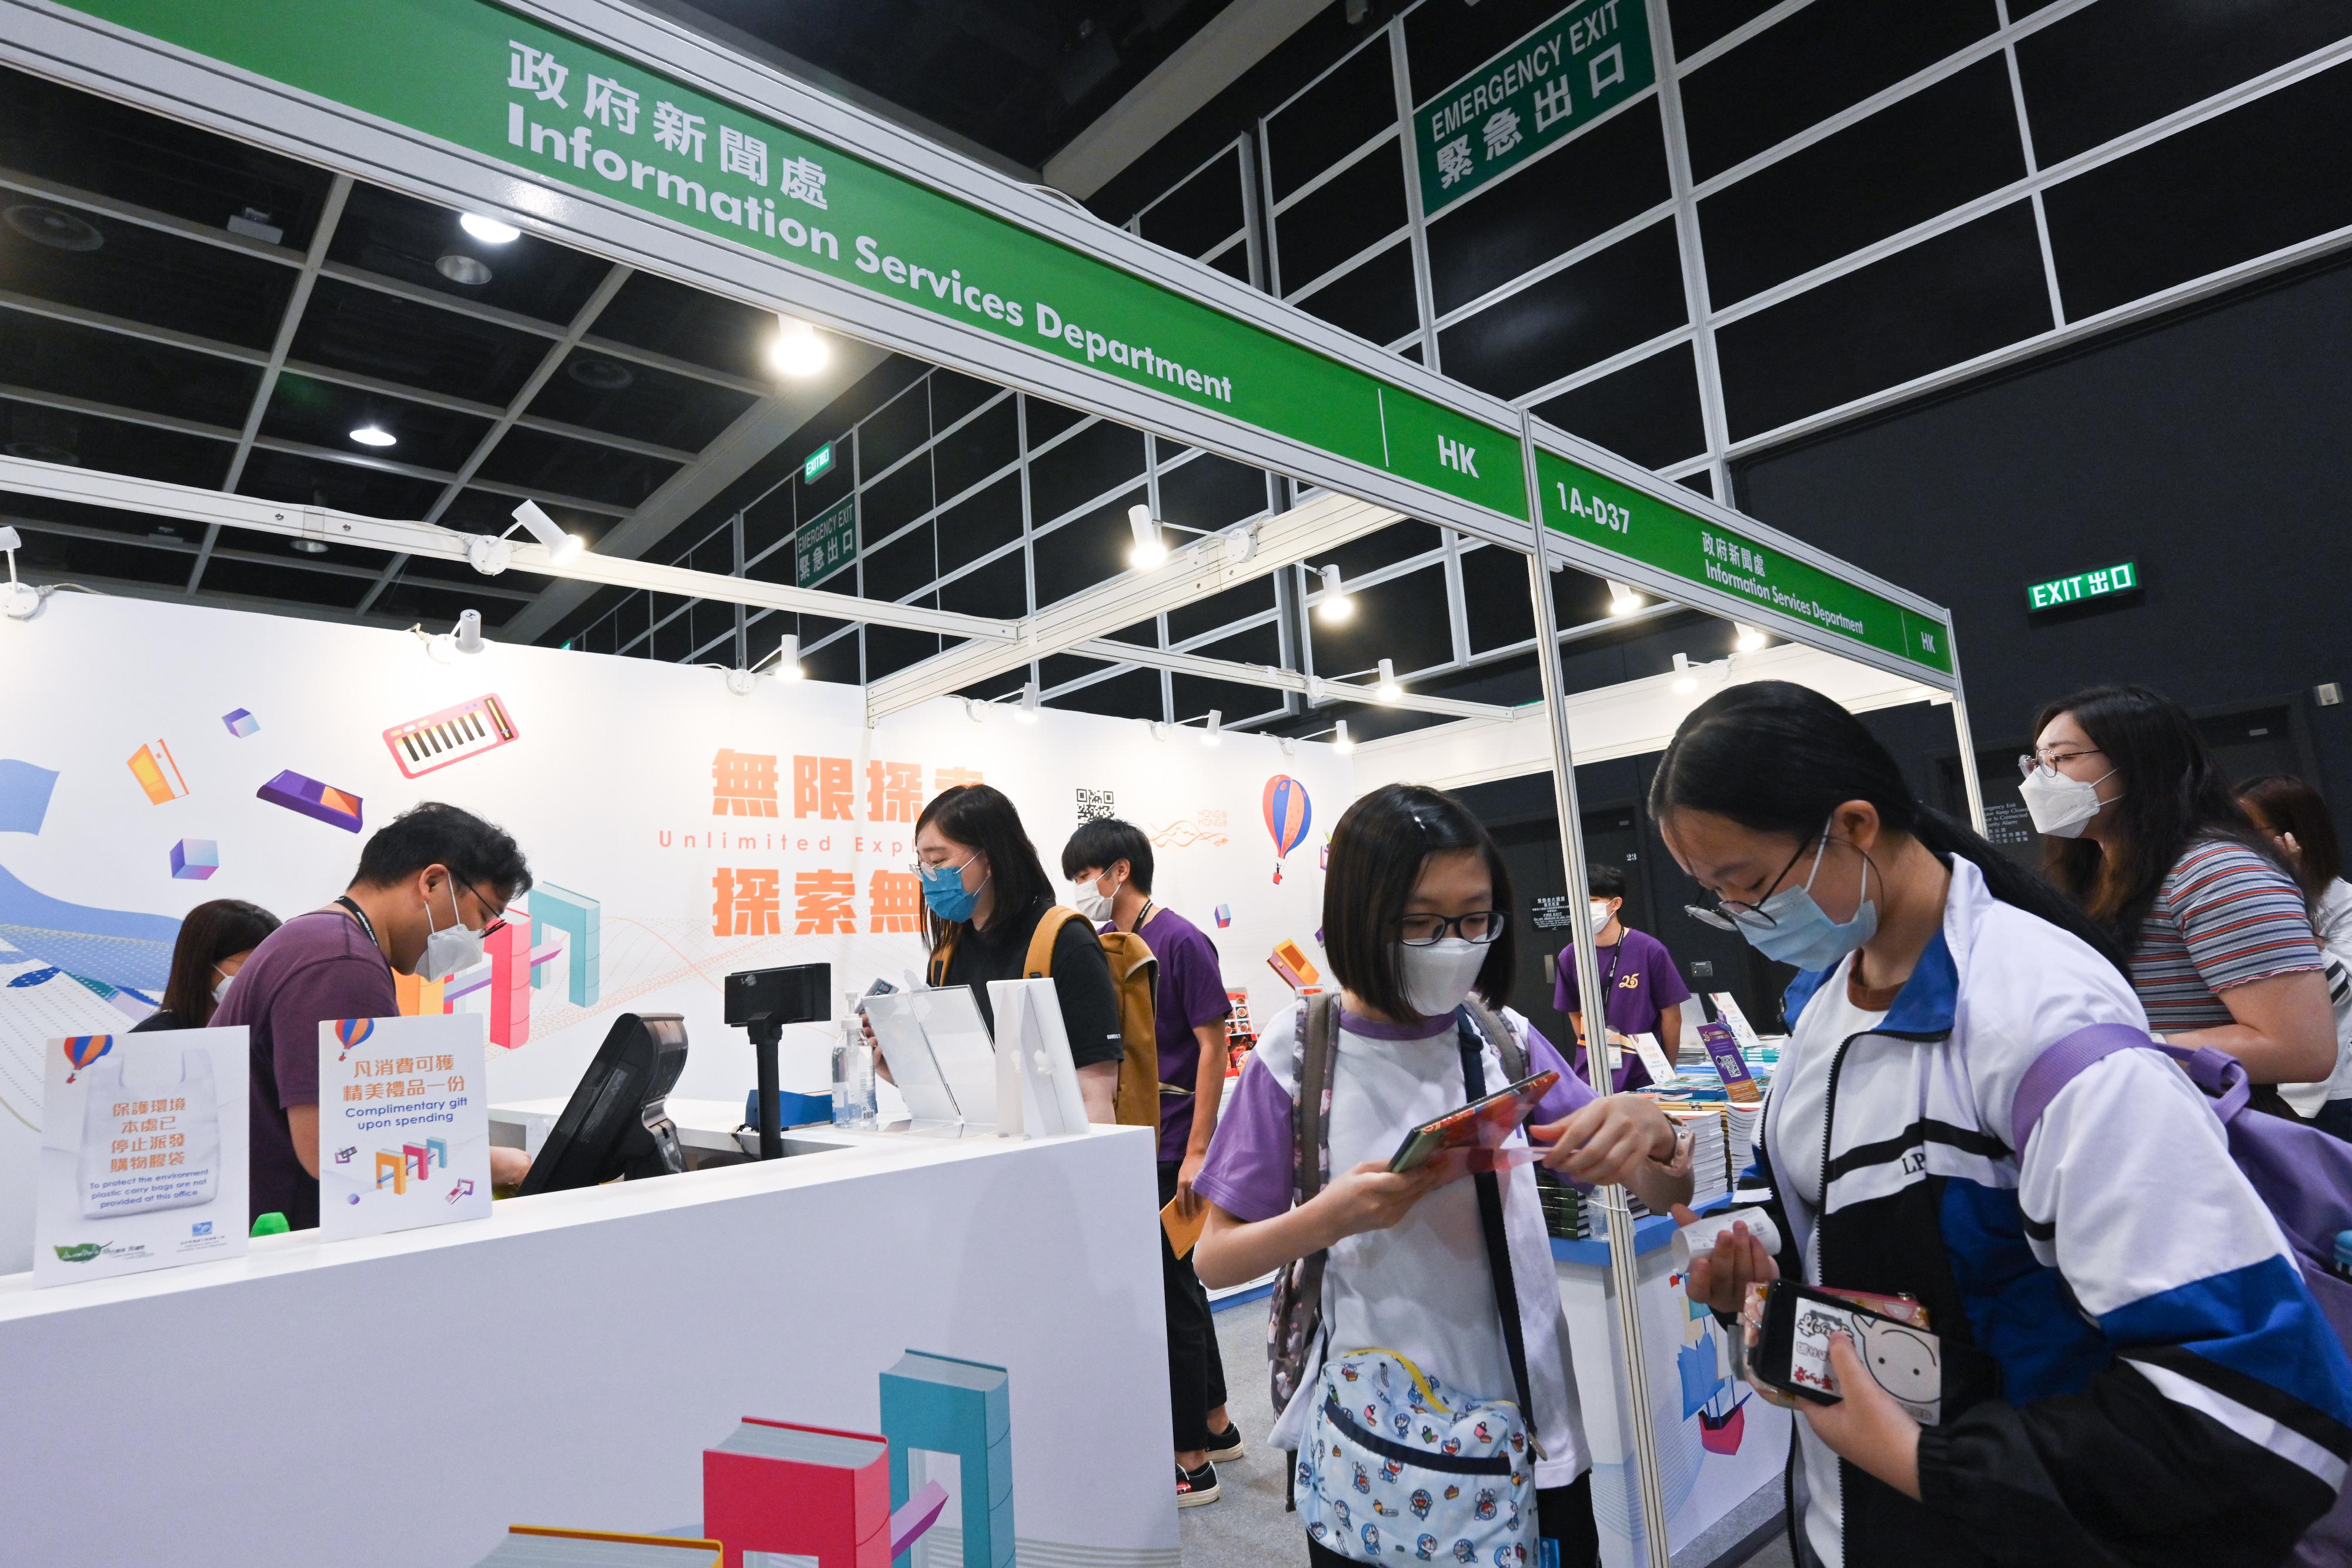 The Information Services Department (ISD) is taking part in this year's Hong Kong Book Fair from today (July 20) to July 26 under the theme "Unlimited Exploration". Photo shows readers visiting the ISD booth at Stall D37 in Hall 1A for publications.